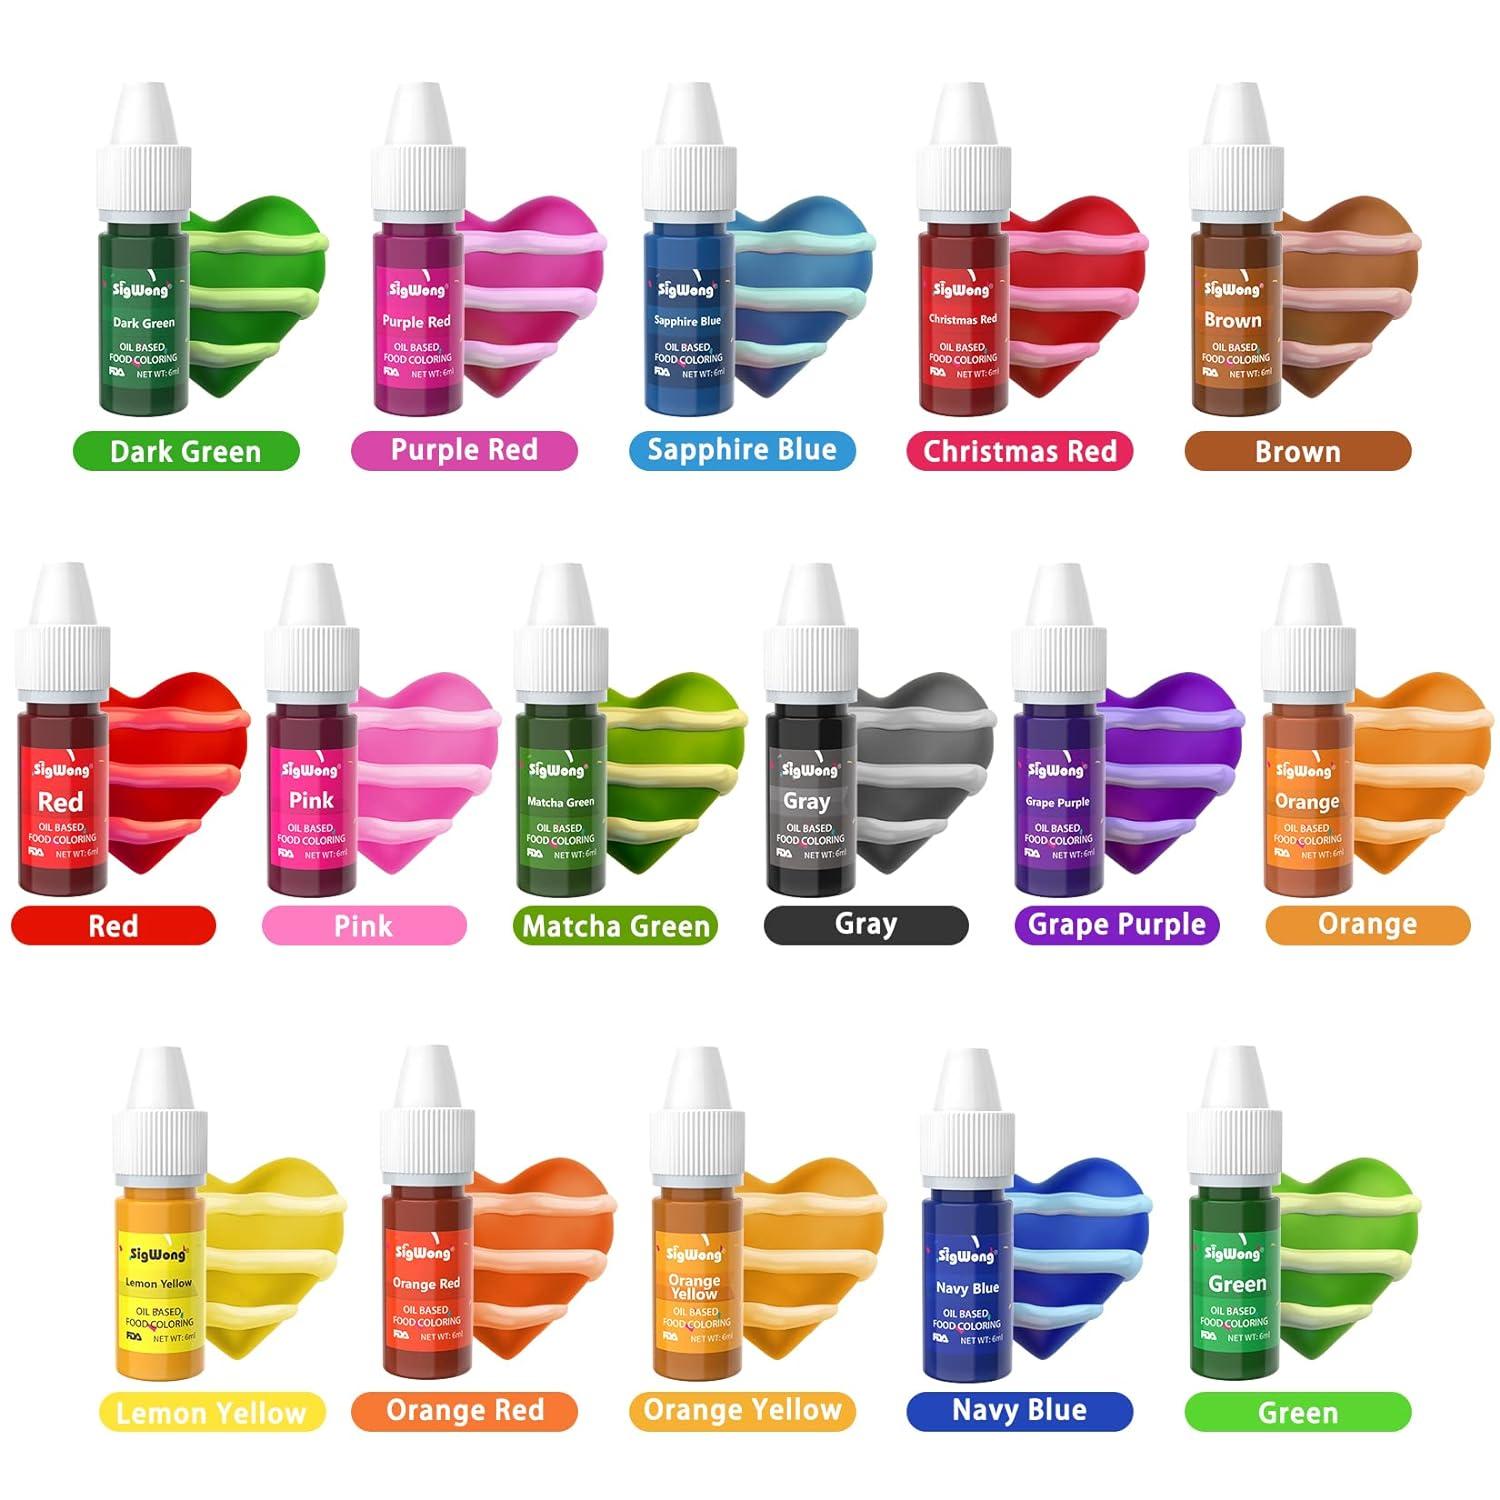 Oil Based Food Coloring for Chocolate - 16 Colors Upgraded Edible Food Dye  Coloring for Cake Decorating Baking Cake Color Cookie Icing Frosting  Fondant Meringues - 0.21 Fl.Oz Bottles 0.20 Fl Oz (Pack of 16)